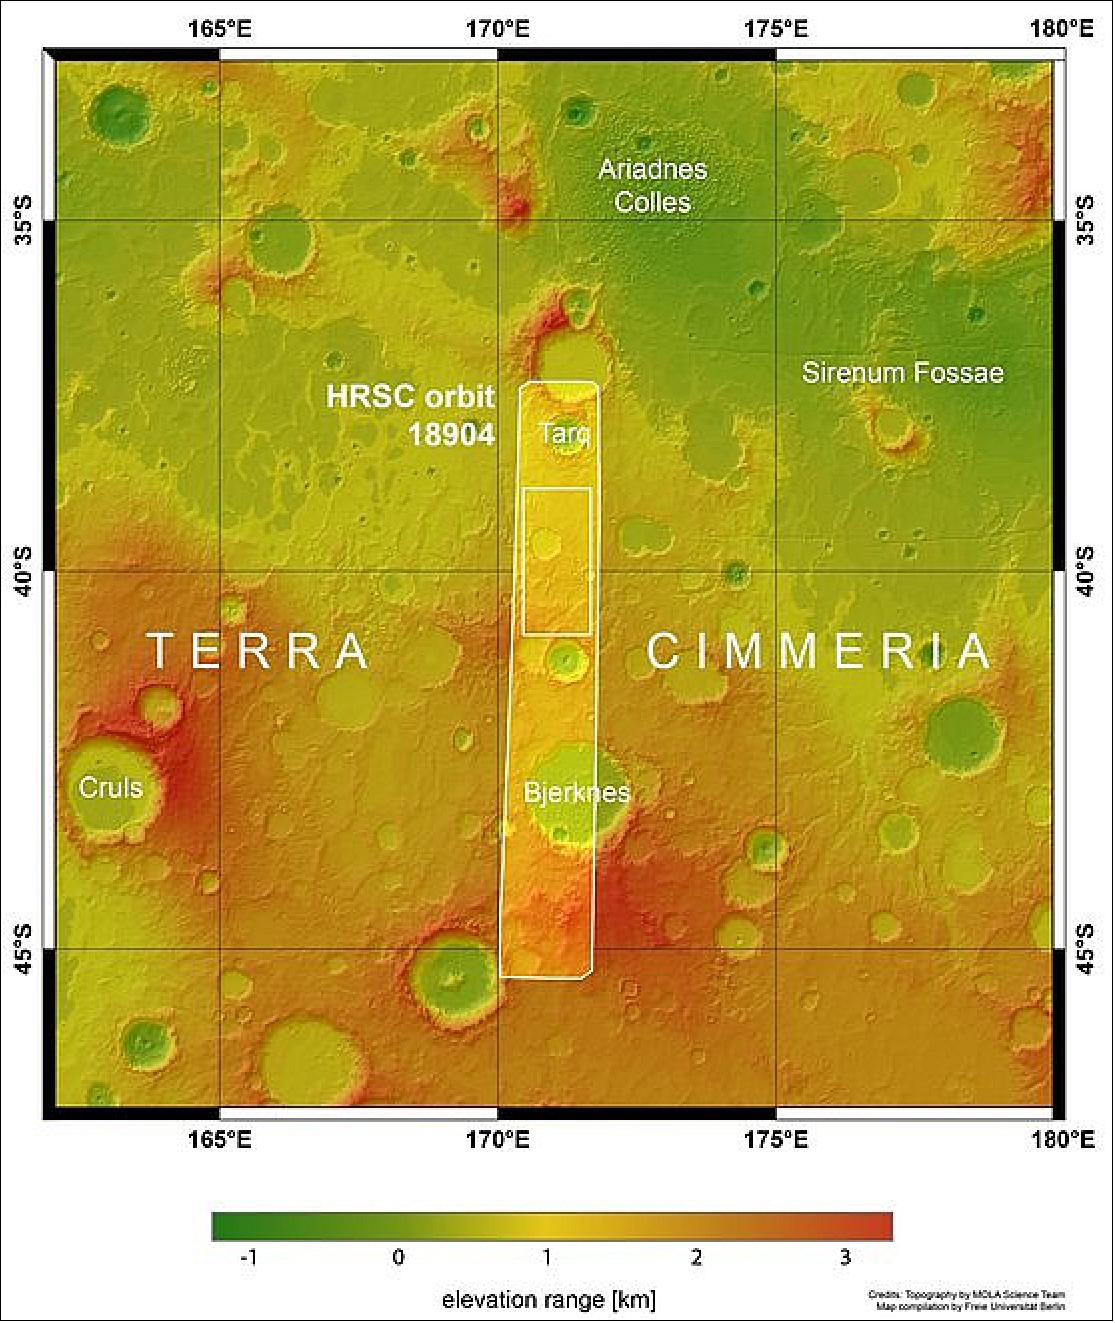 Figure 23: Terra Cimmeria in context. This image shows Terra Cimmeria, a region found in the southern highlands of Mars. The area outlined by the bold white box indicates the area imaged by the Mars Express High Resolution Stereo Camera on 11 December 2018 during orbit 18904 (image credit: NASA MGS MOLA Science Team)